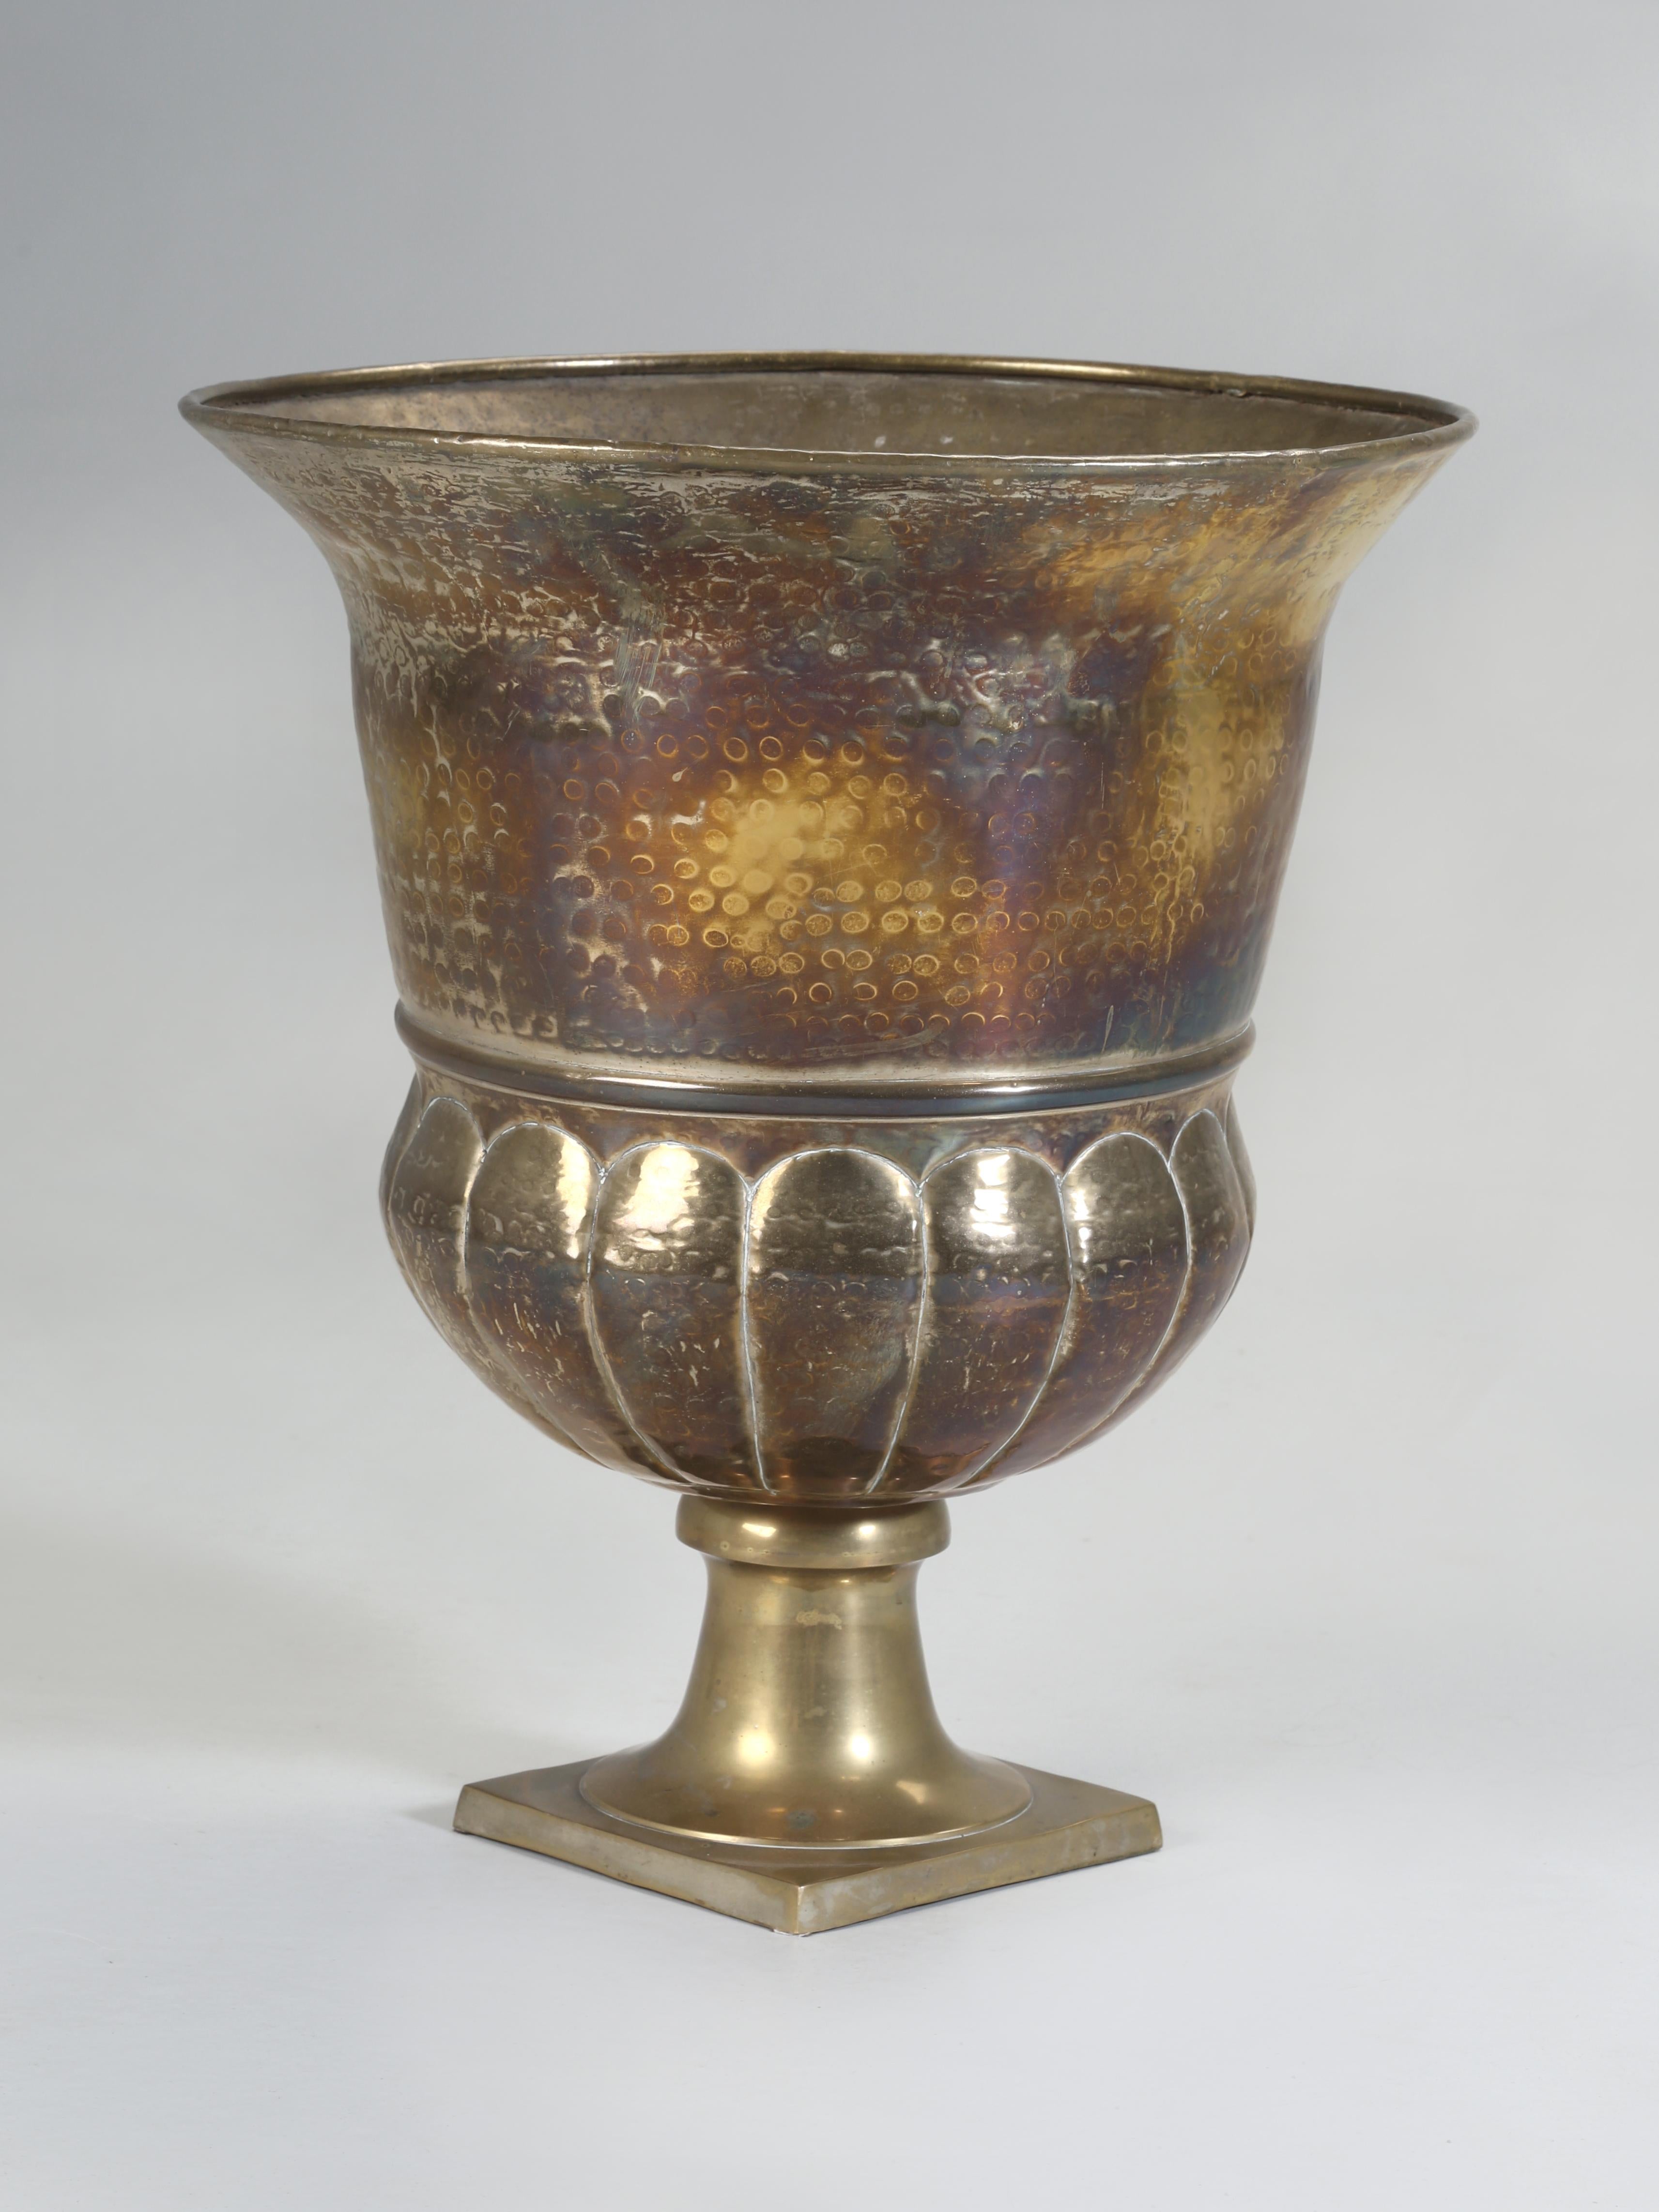 Beautiful huge solid Brass Vase or Solid Brass Urn. The brass was hand-hammered and give the vase a great texture. Since the vase or urn is made from brass, it is quite easy to polish, but as soon as we do, I am sure someone is going to walk into